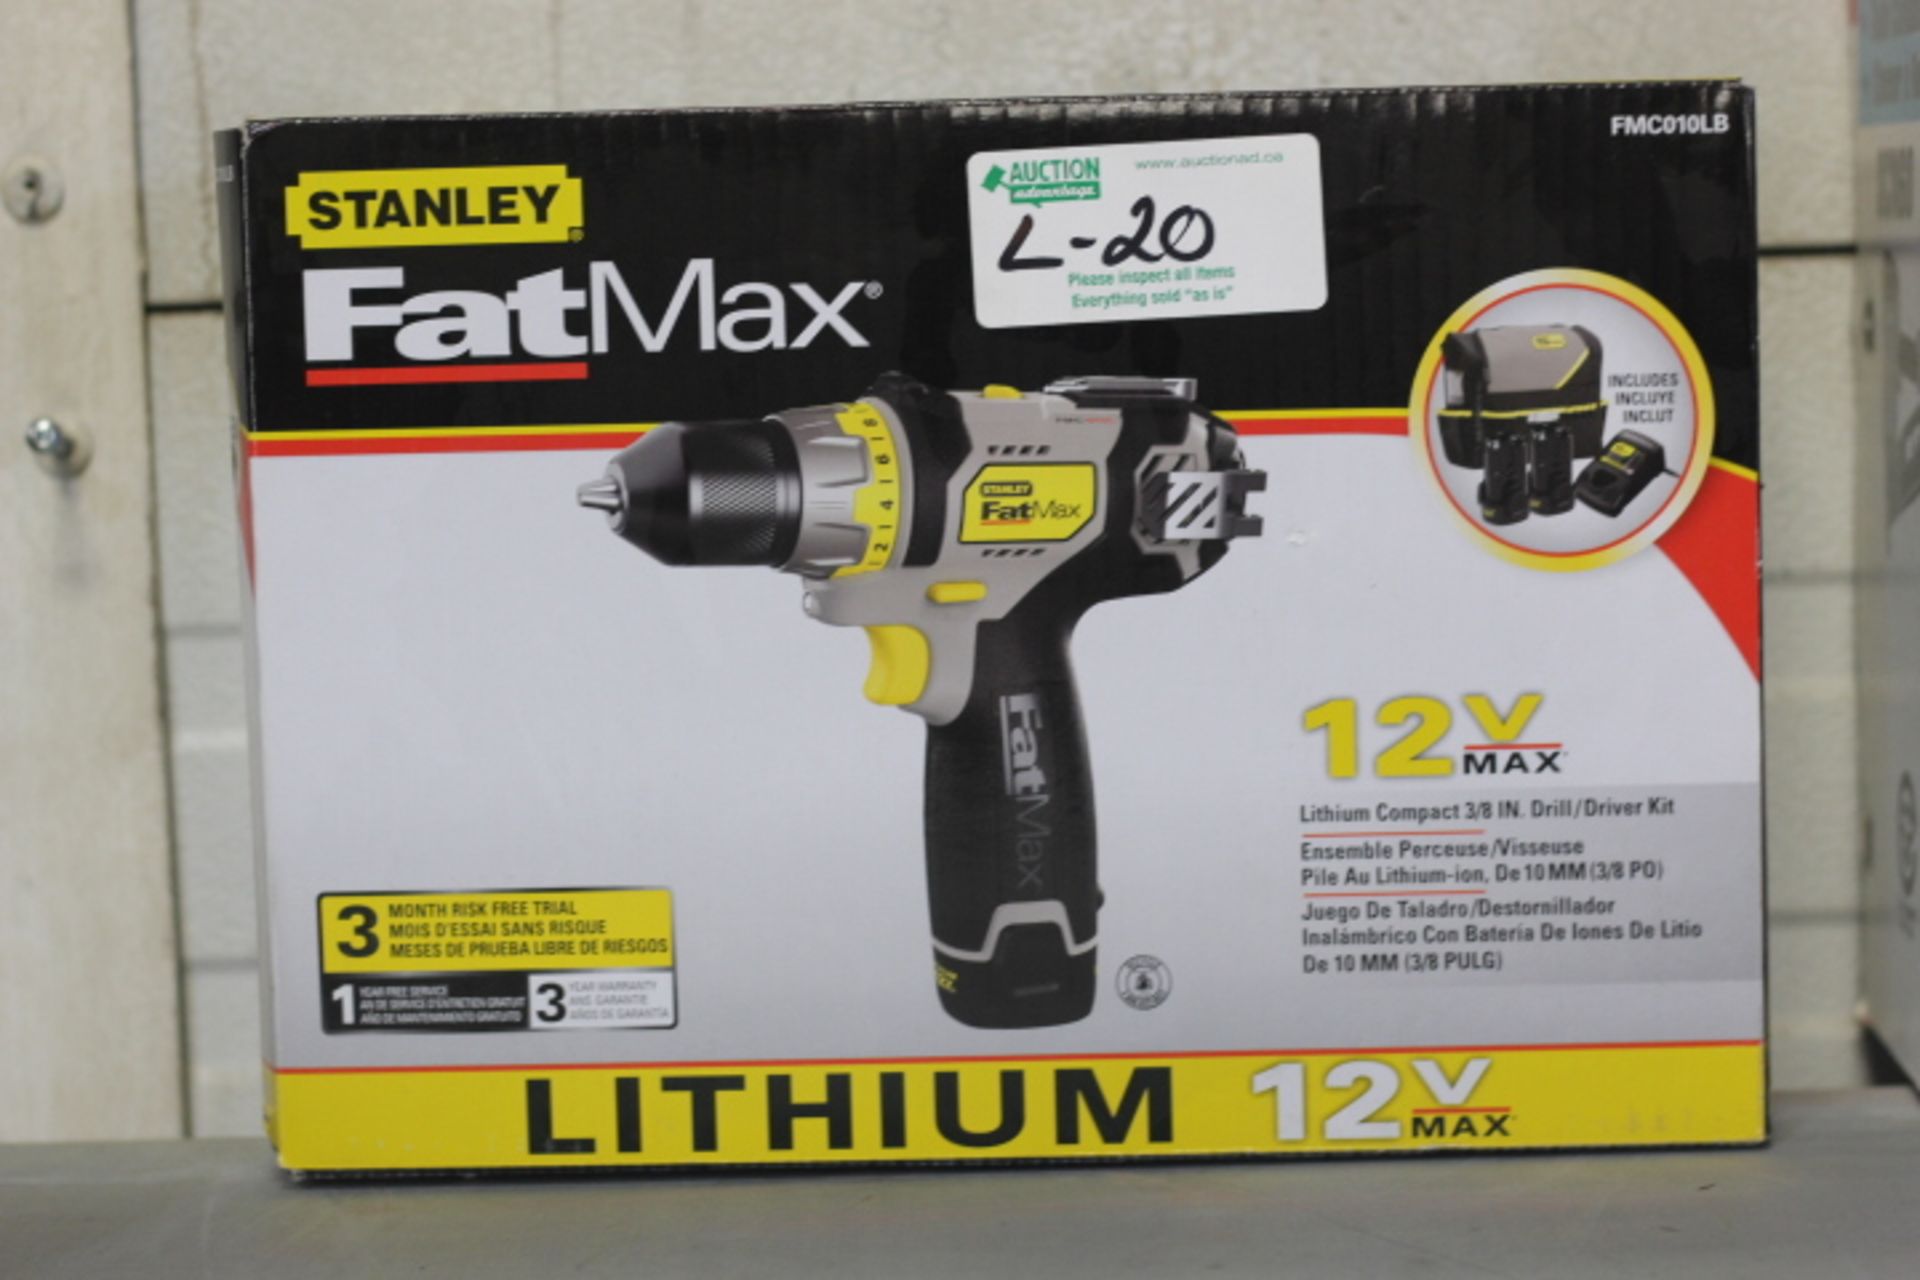 New Stanley Fatmax 12 volt Drill and Driver Kit 3/8"